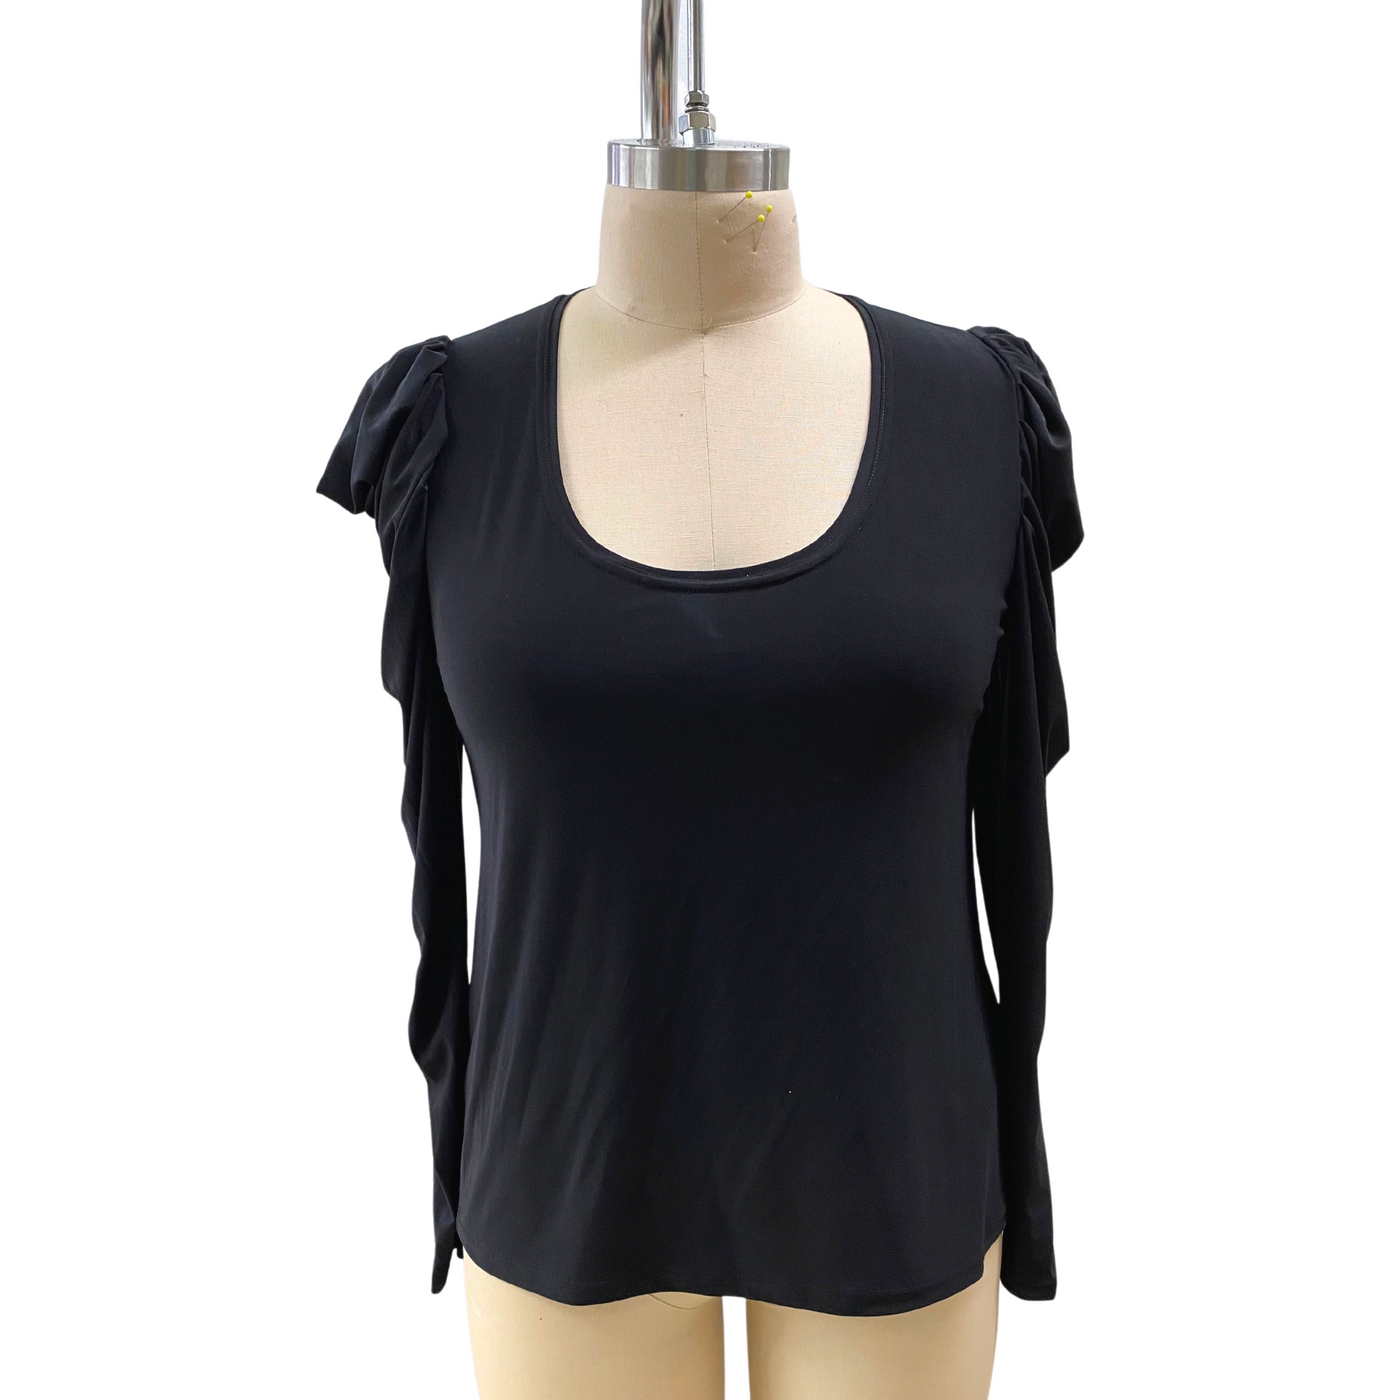 Viola Scoop Neck Top | Erupt Collection - G'wan by Charon